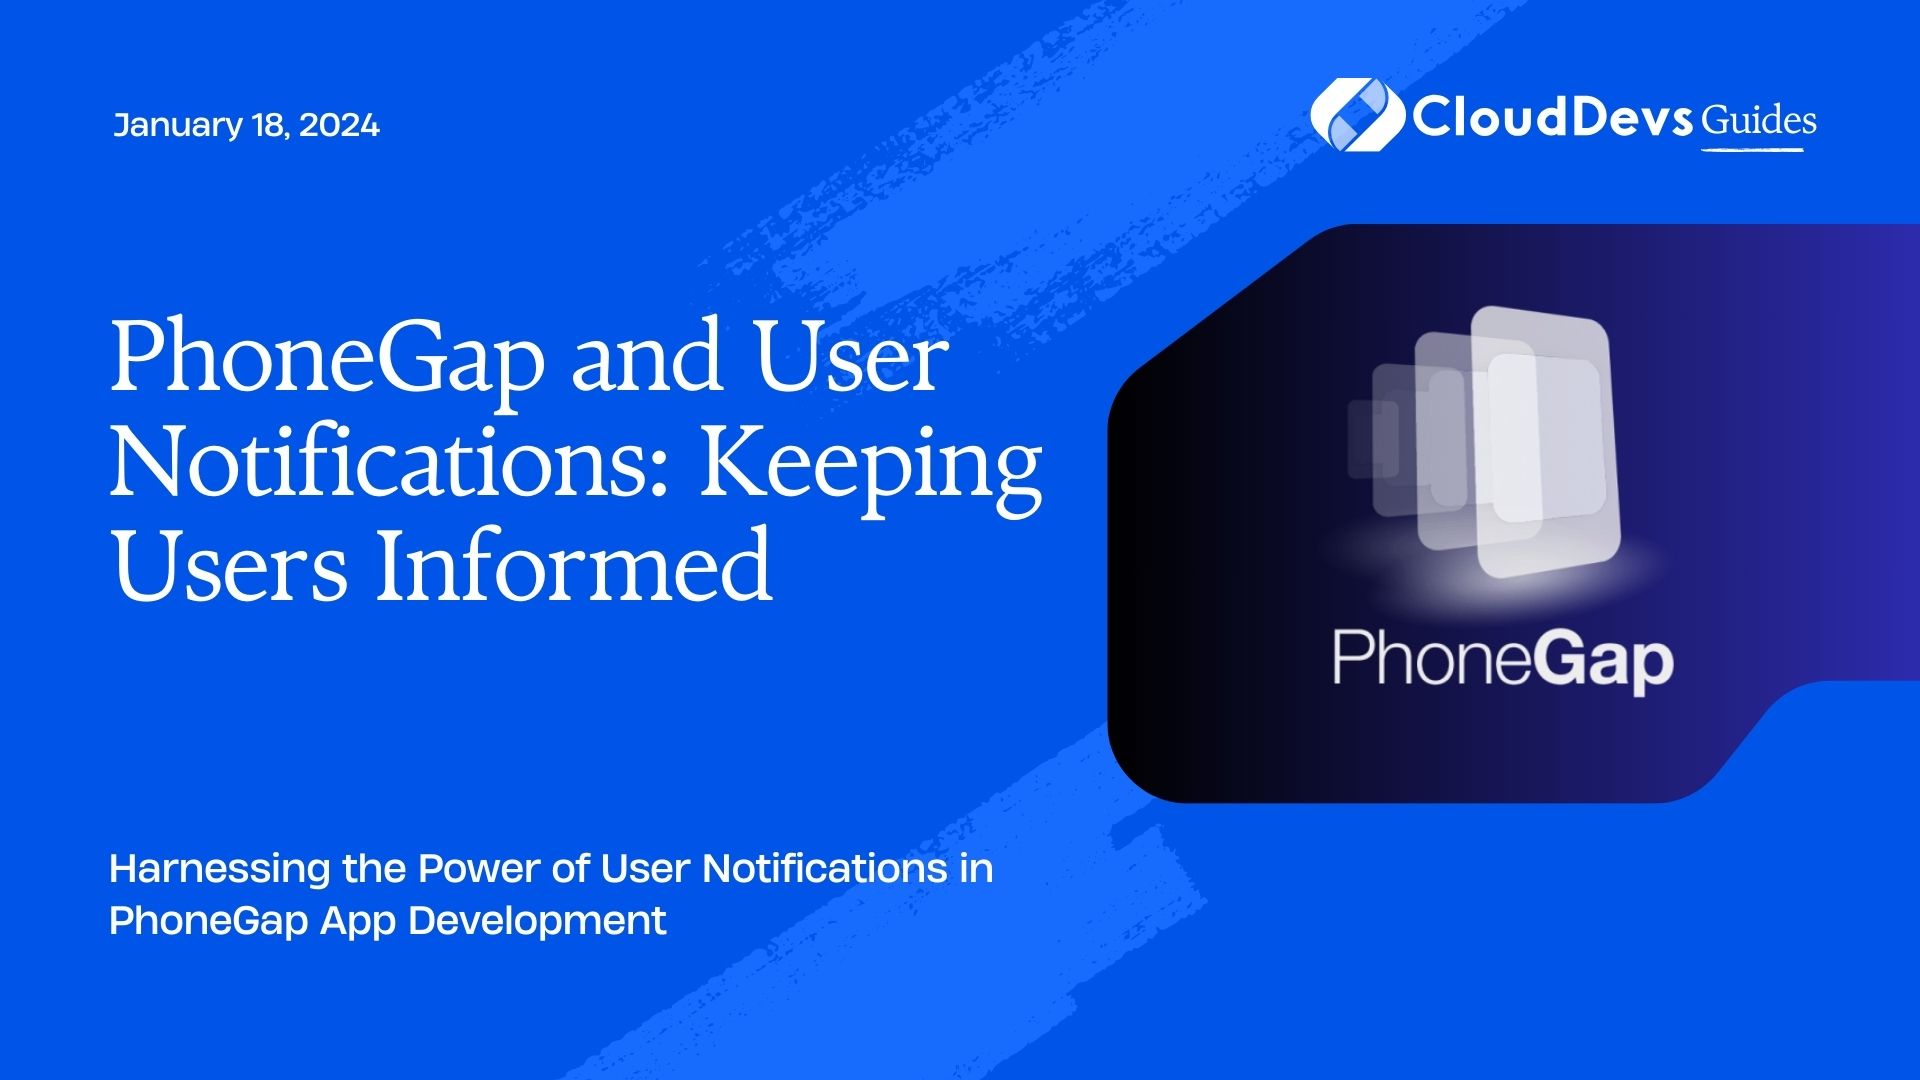 PhoneGap and User Notifications: Keeping Users Informed